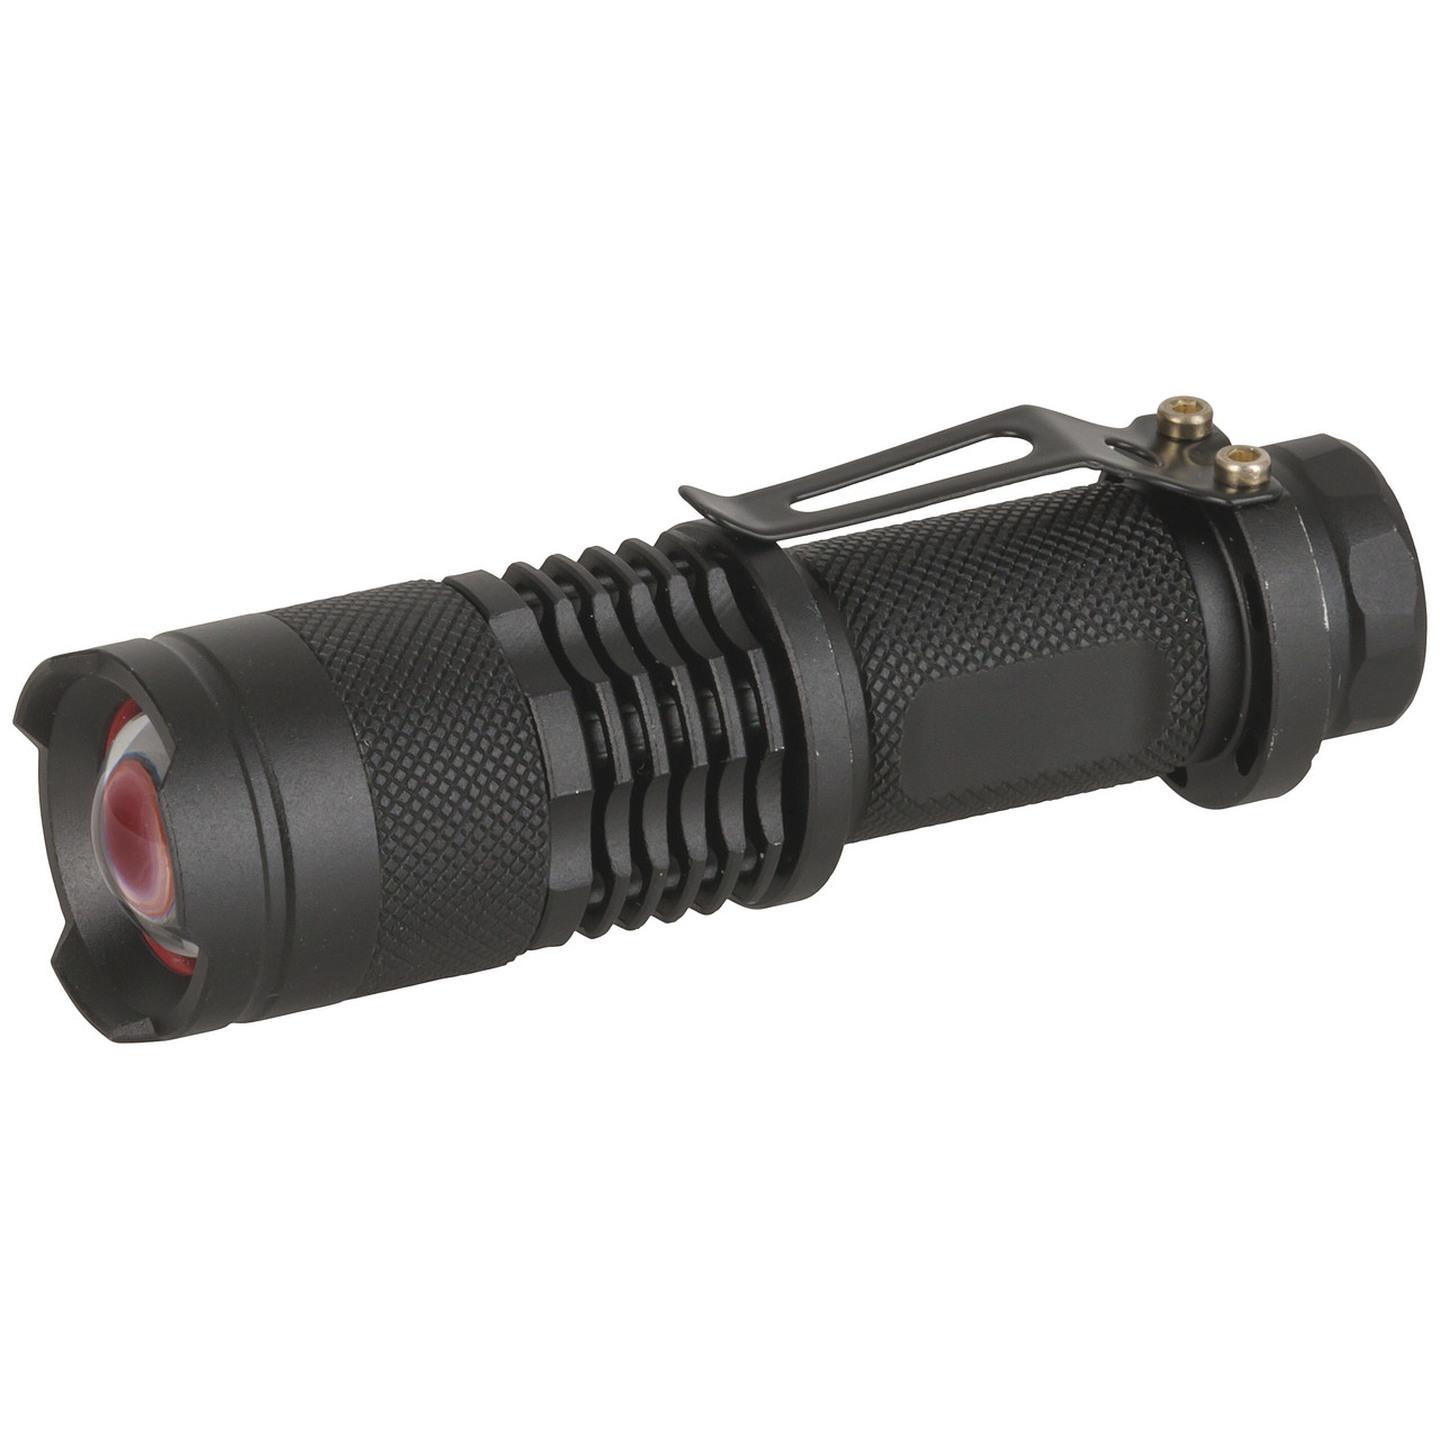 Mini LED Torch with Adjustable Beam